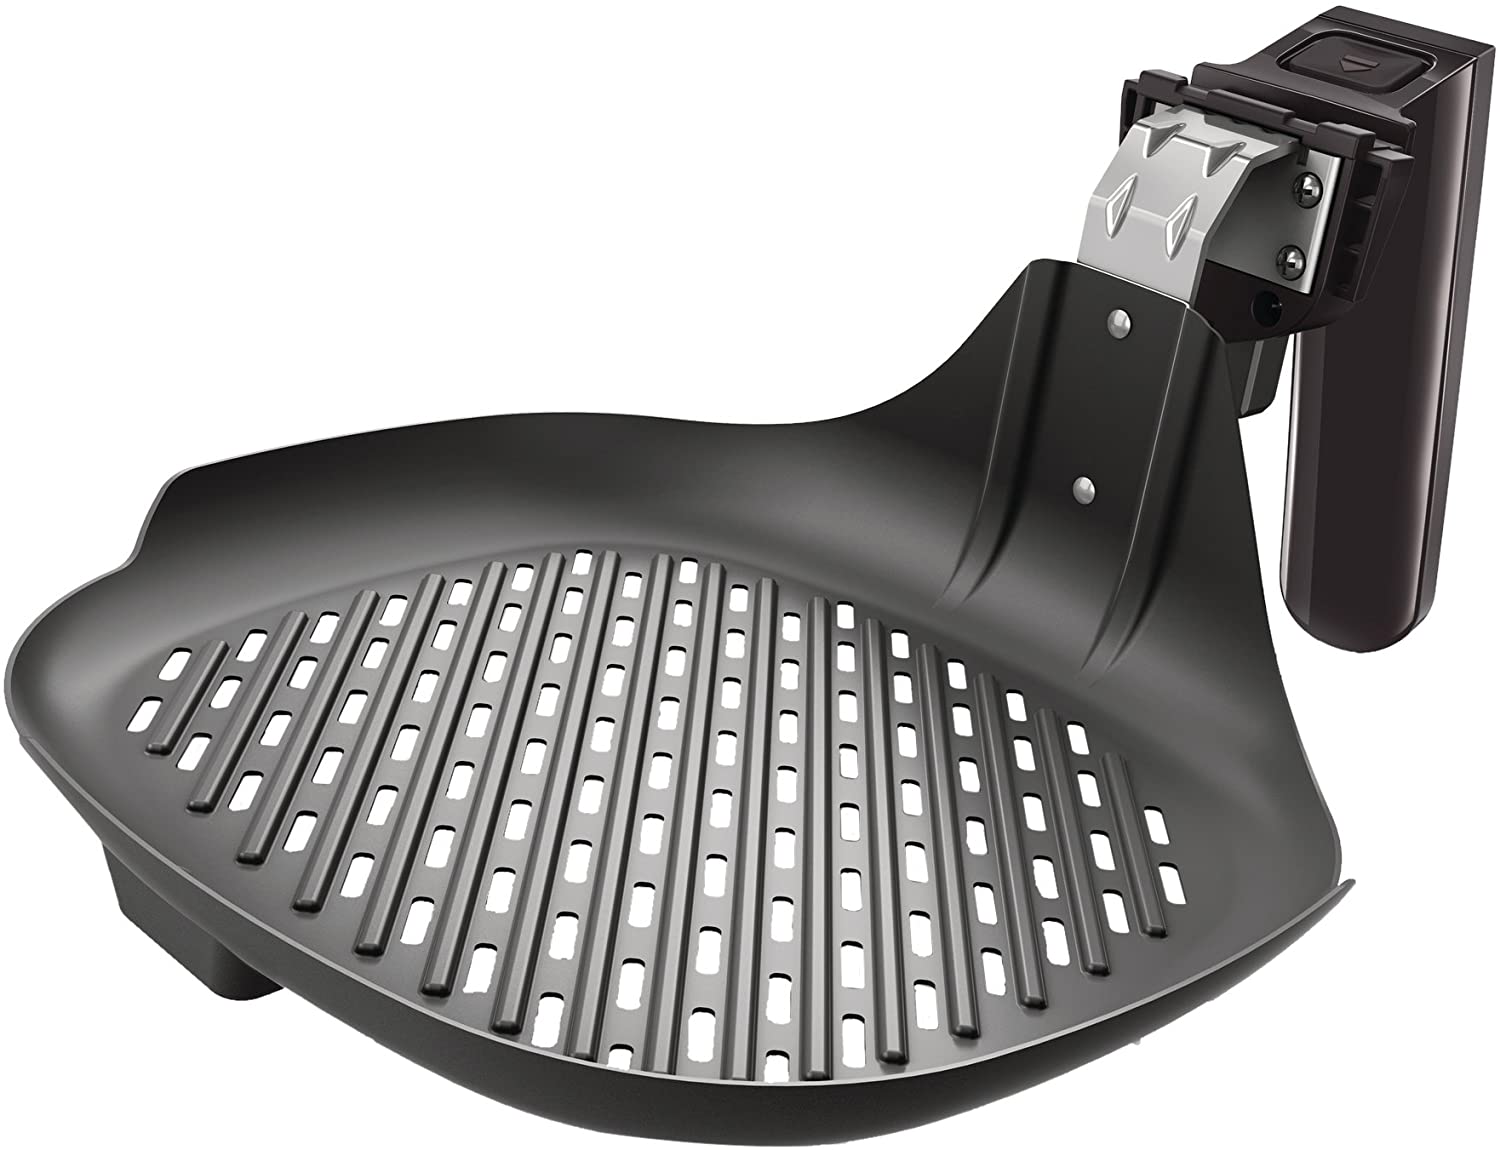 Philips HD9910 / 20 grill pan (accessory for Airfryer, non-stick surface) black